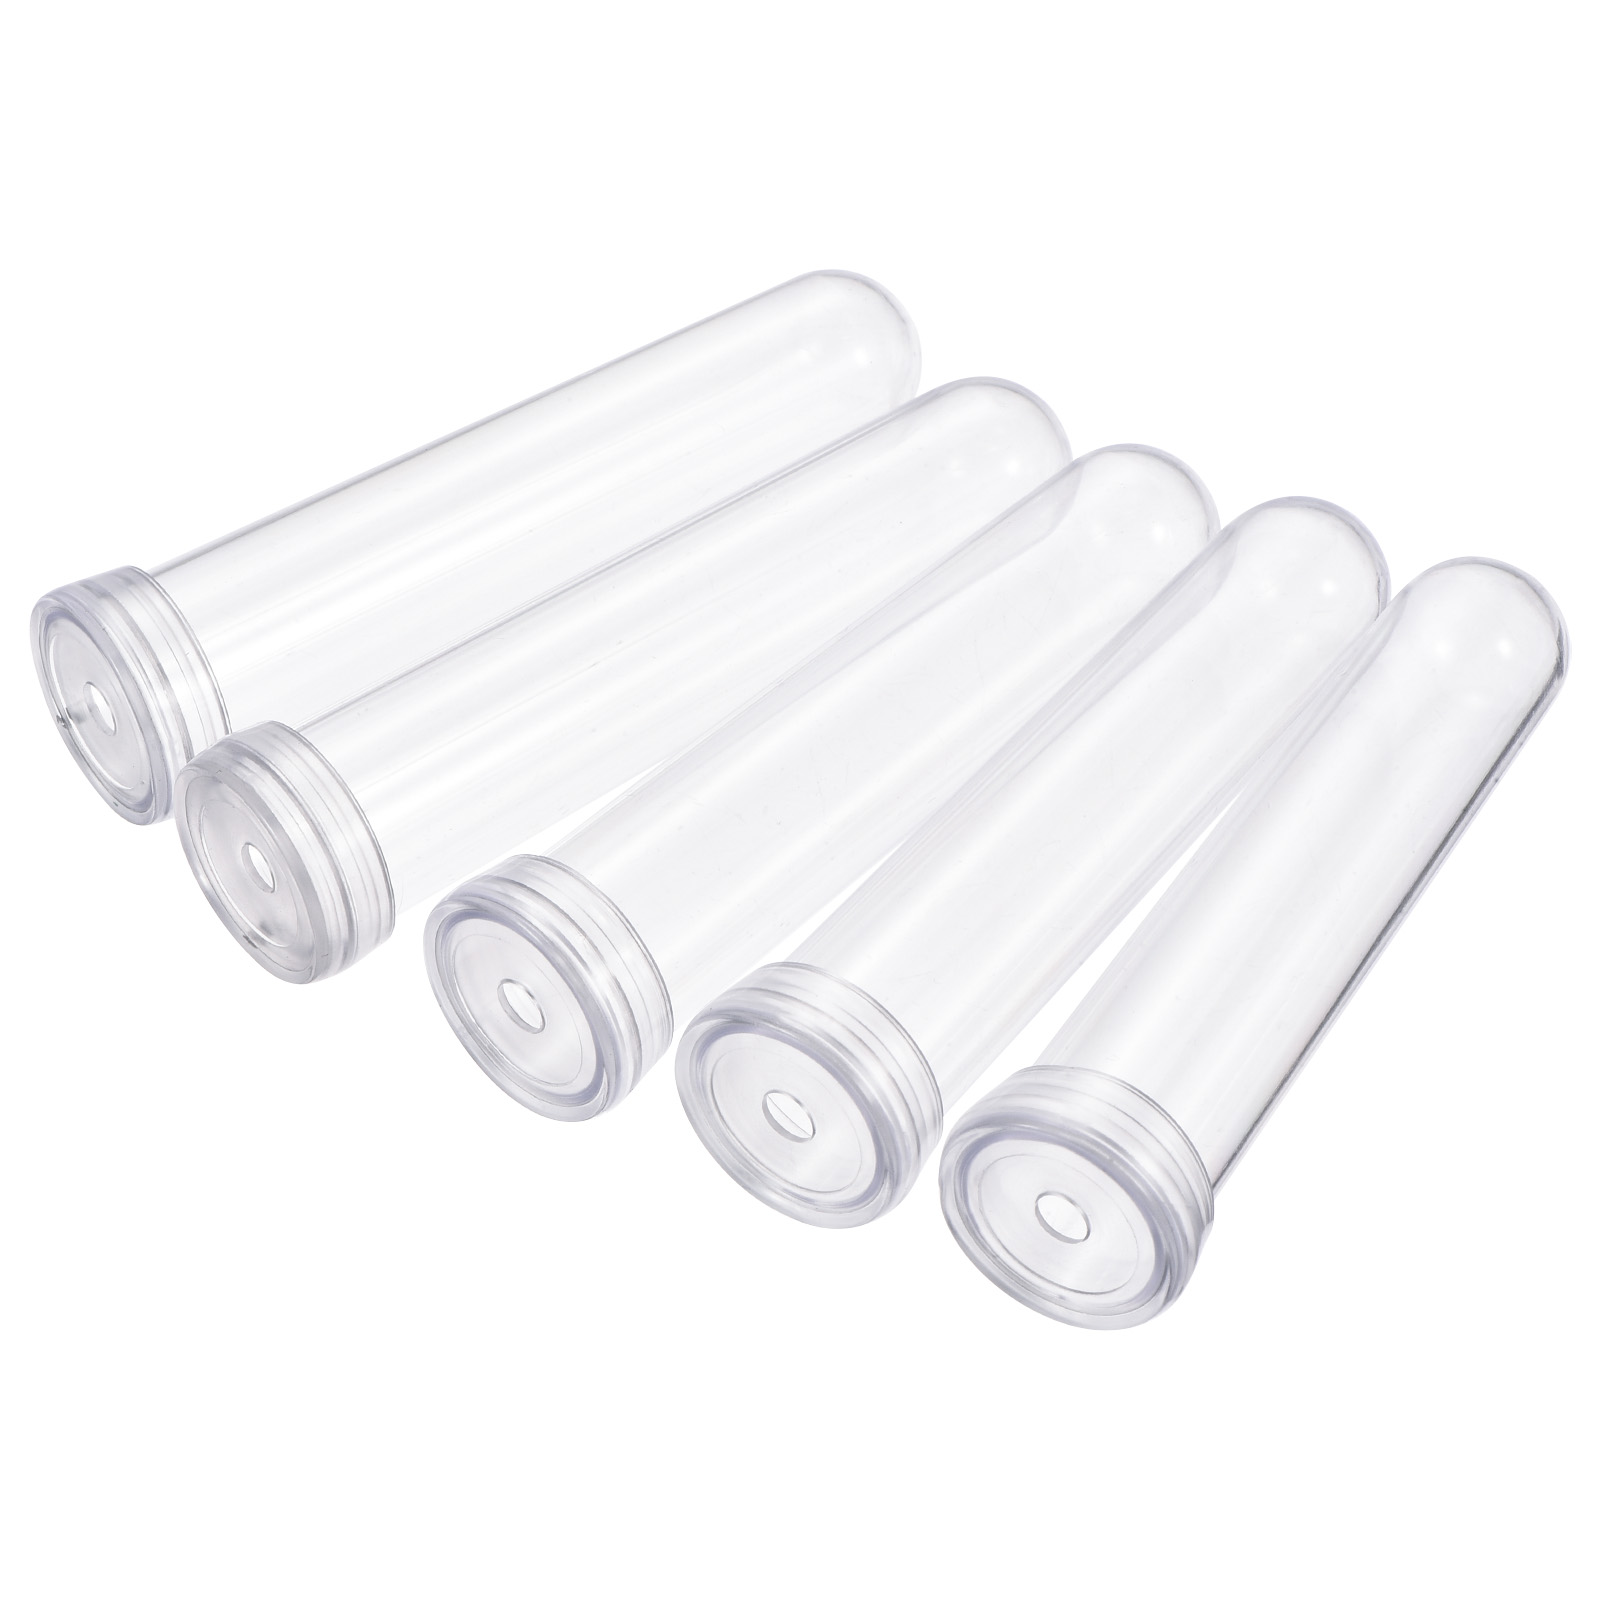 Uxcell 0.75 ID x 3.7 Plastic Floral Water Tubes with Caps, Clear 7 Count  